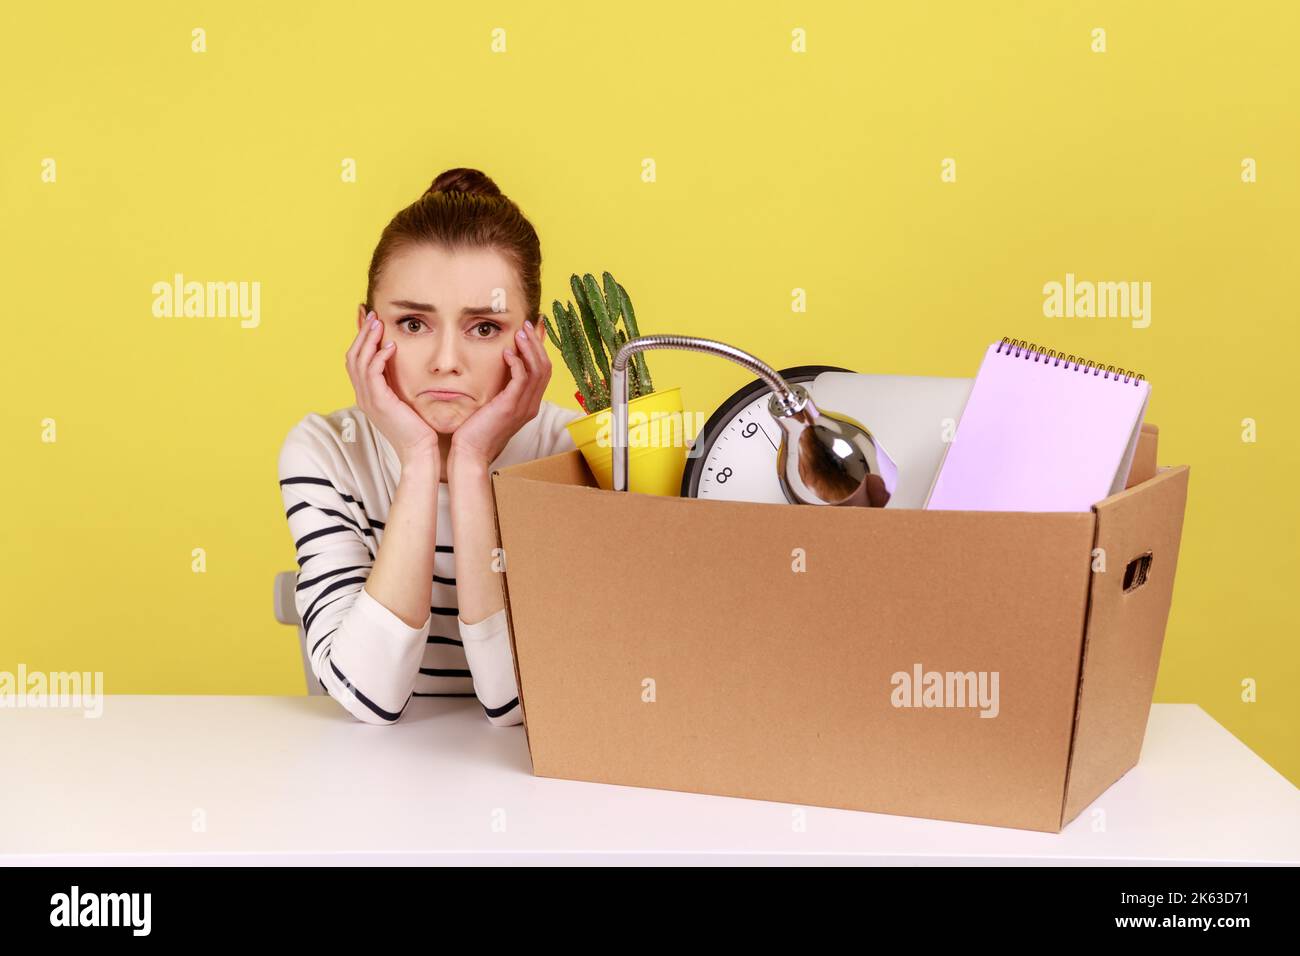 Unhappy depressed woman office worker sitting at workplace with cardboard box with her things, dismissal, bankruptcy, keeps hands under chin. Indoor studio studio shot isolated on yellow background. Stock Photo